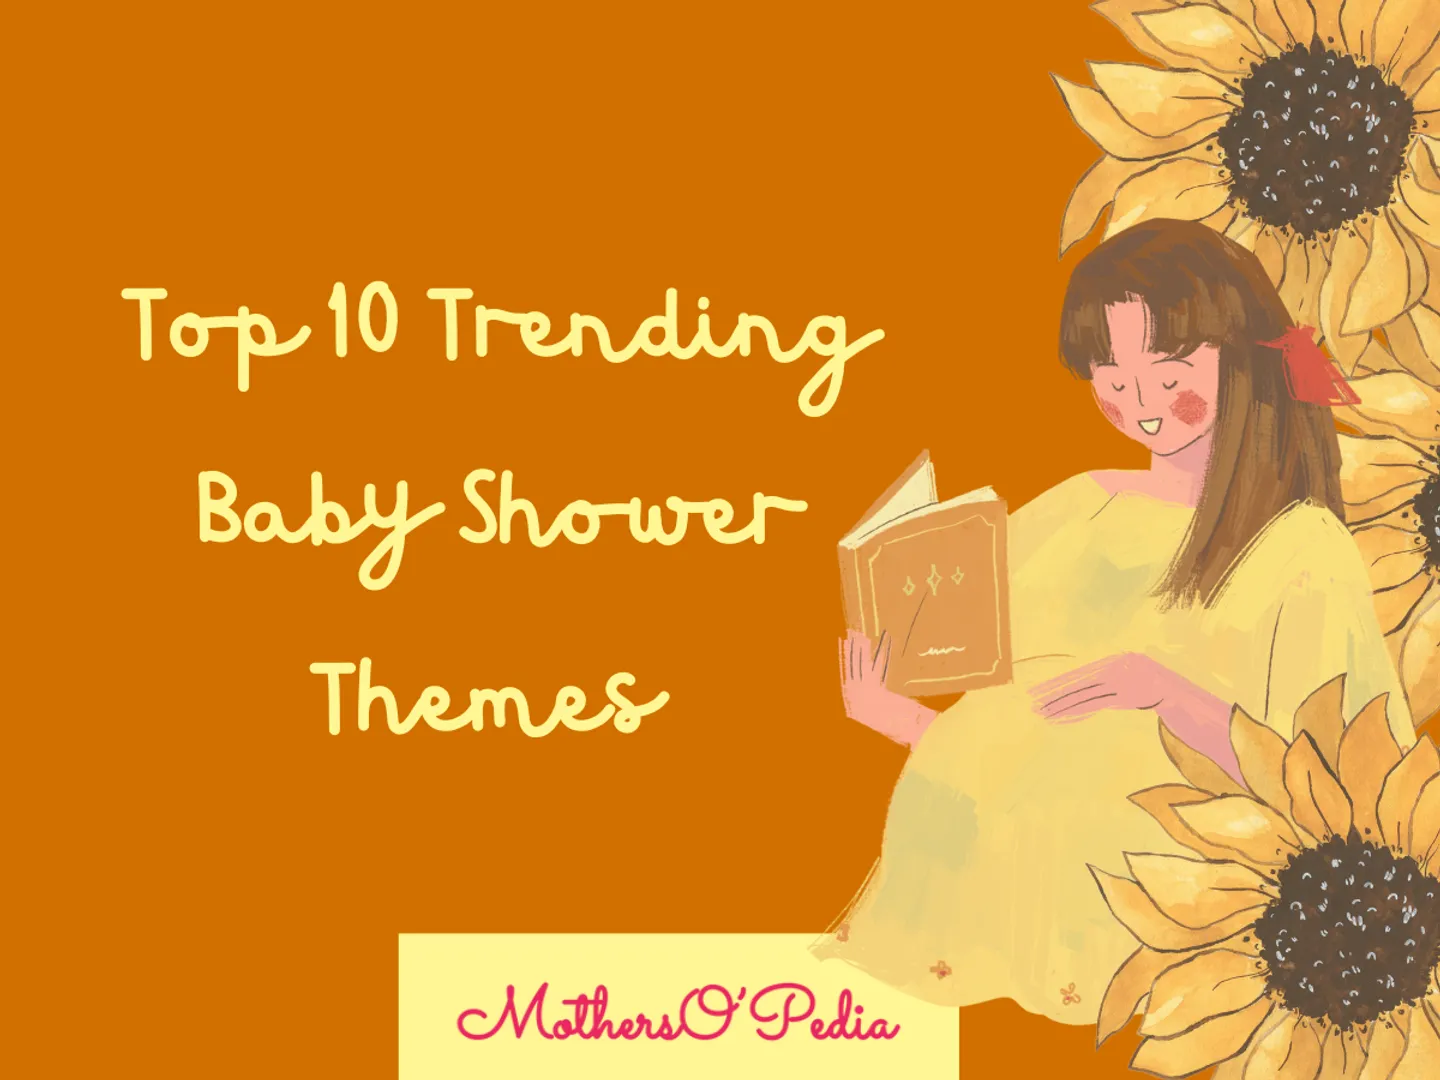  Top 10 Trending Baby Shower Themes  